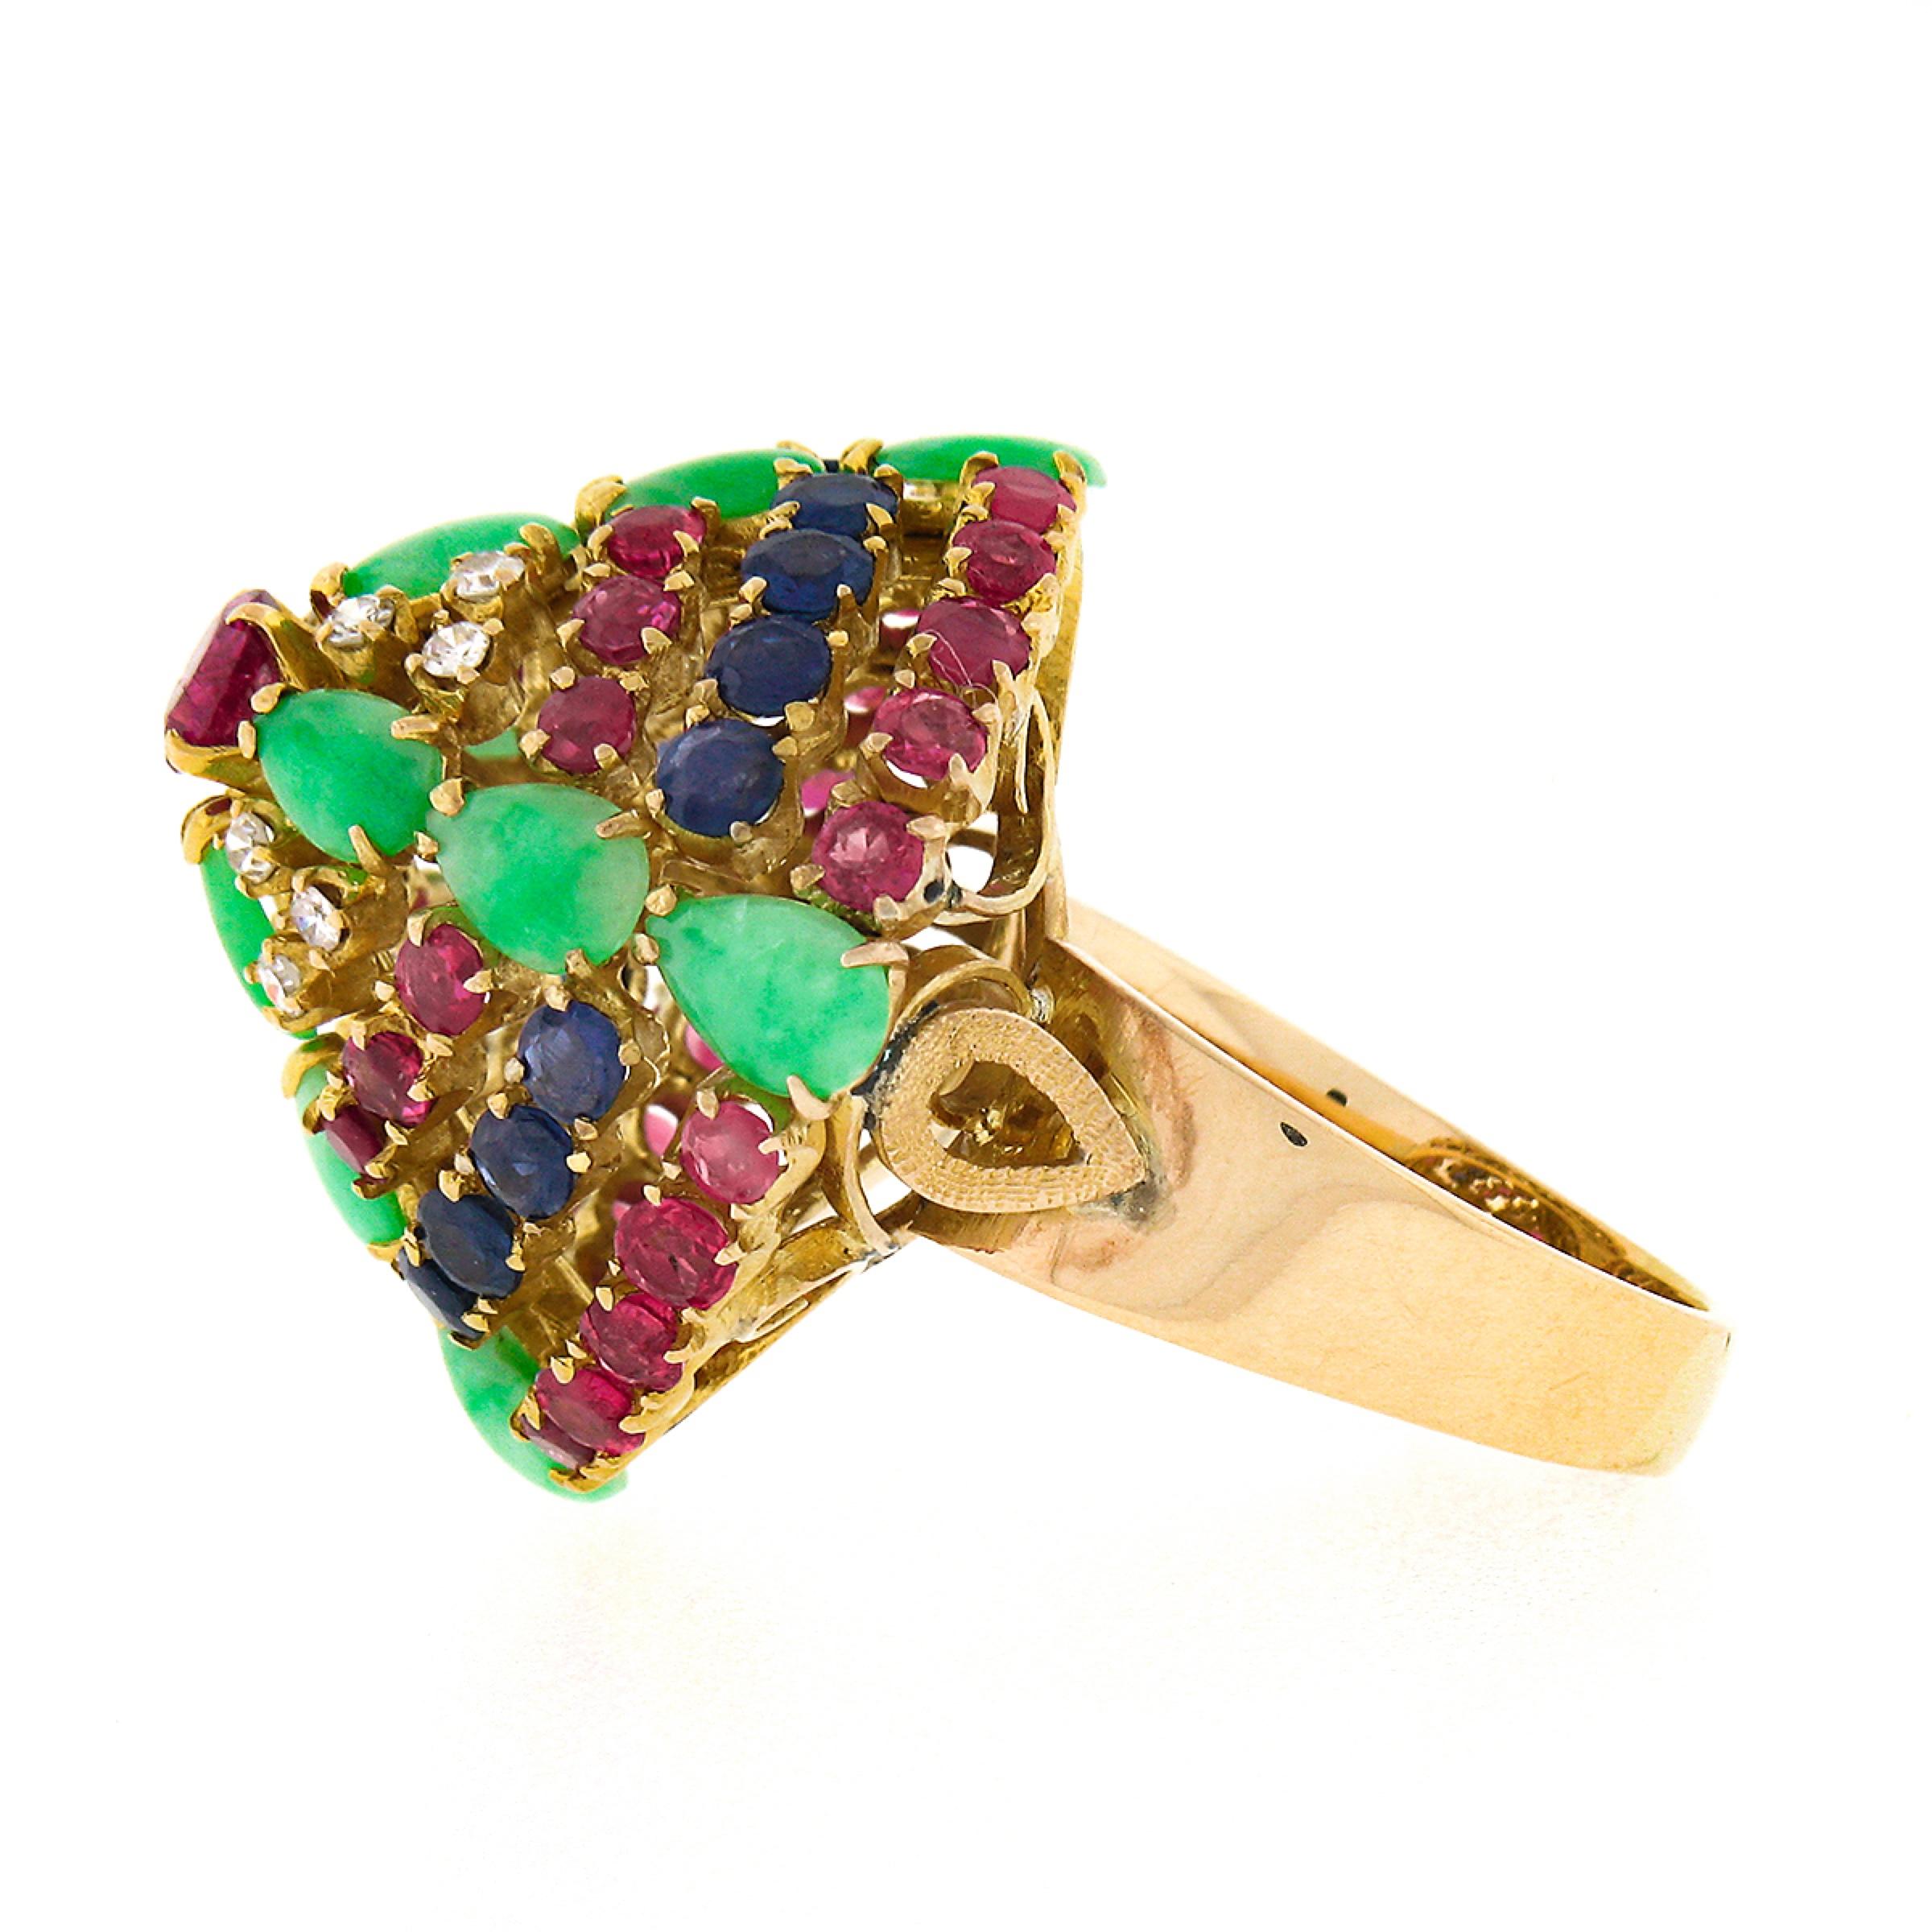 Vintage 14K Gold 4.0ctw Ruby Sapphire Diamond Jade Domed Xmas Tree Pyramid Ring In Good Condition For Sale In Montclair, NJ